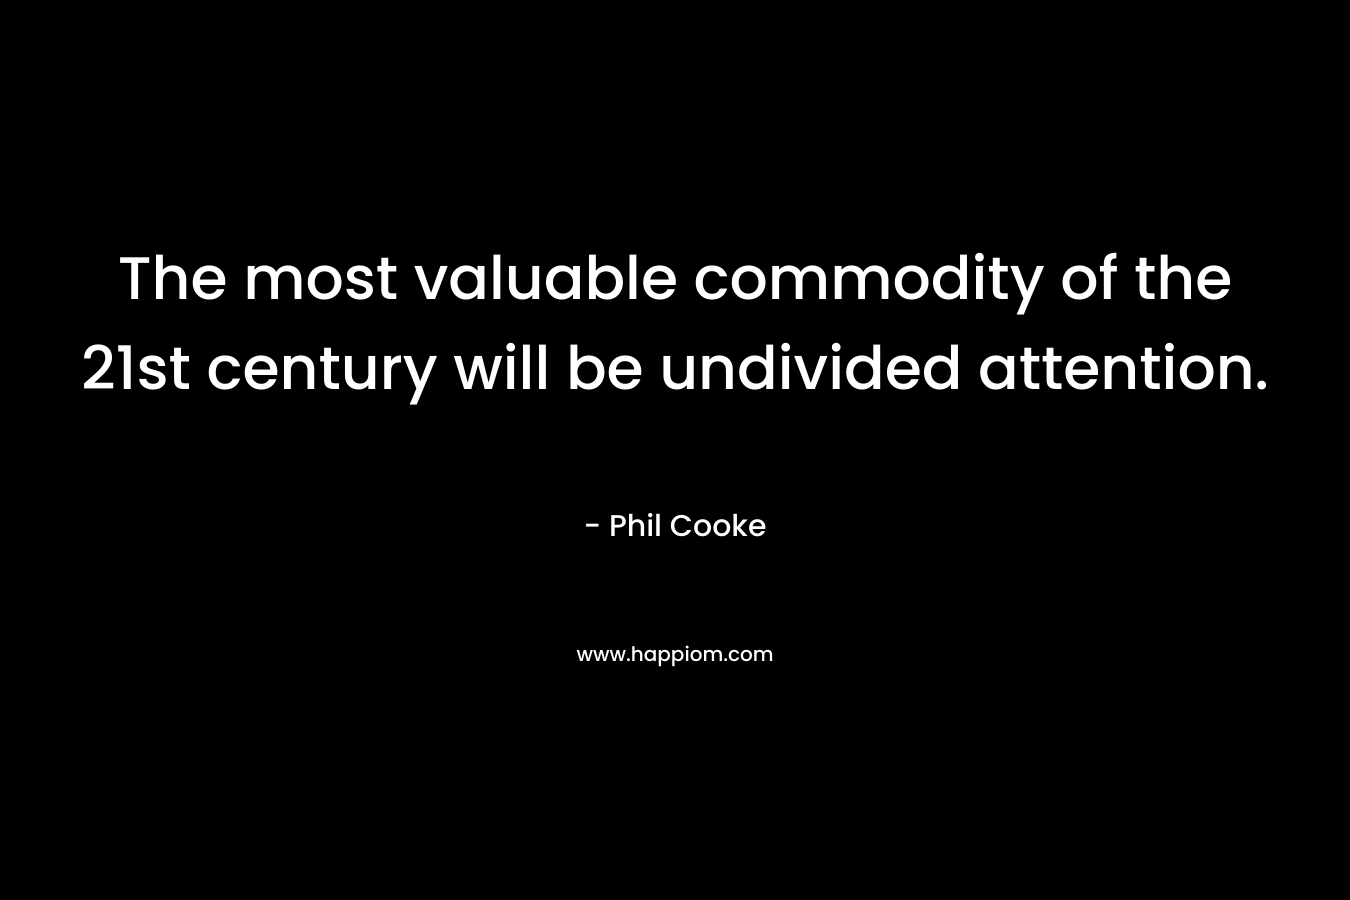 The most valuable commodity of the 21st century will be undivided attention. – Phil Cooke